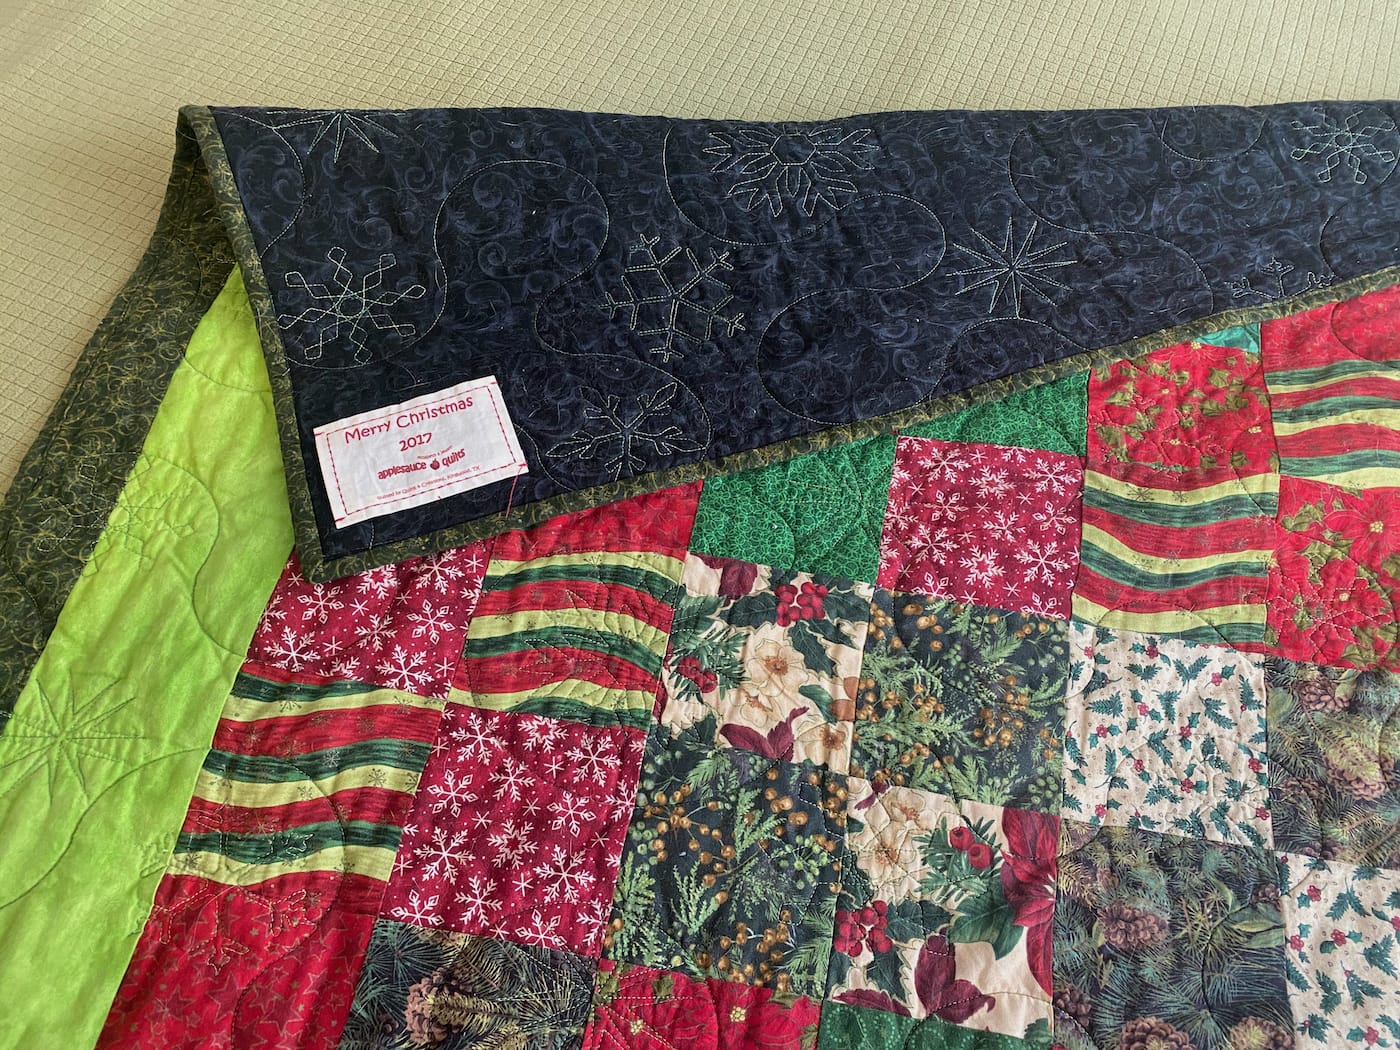 Image shows a quilted blanket with random patterns in holiday colors.